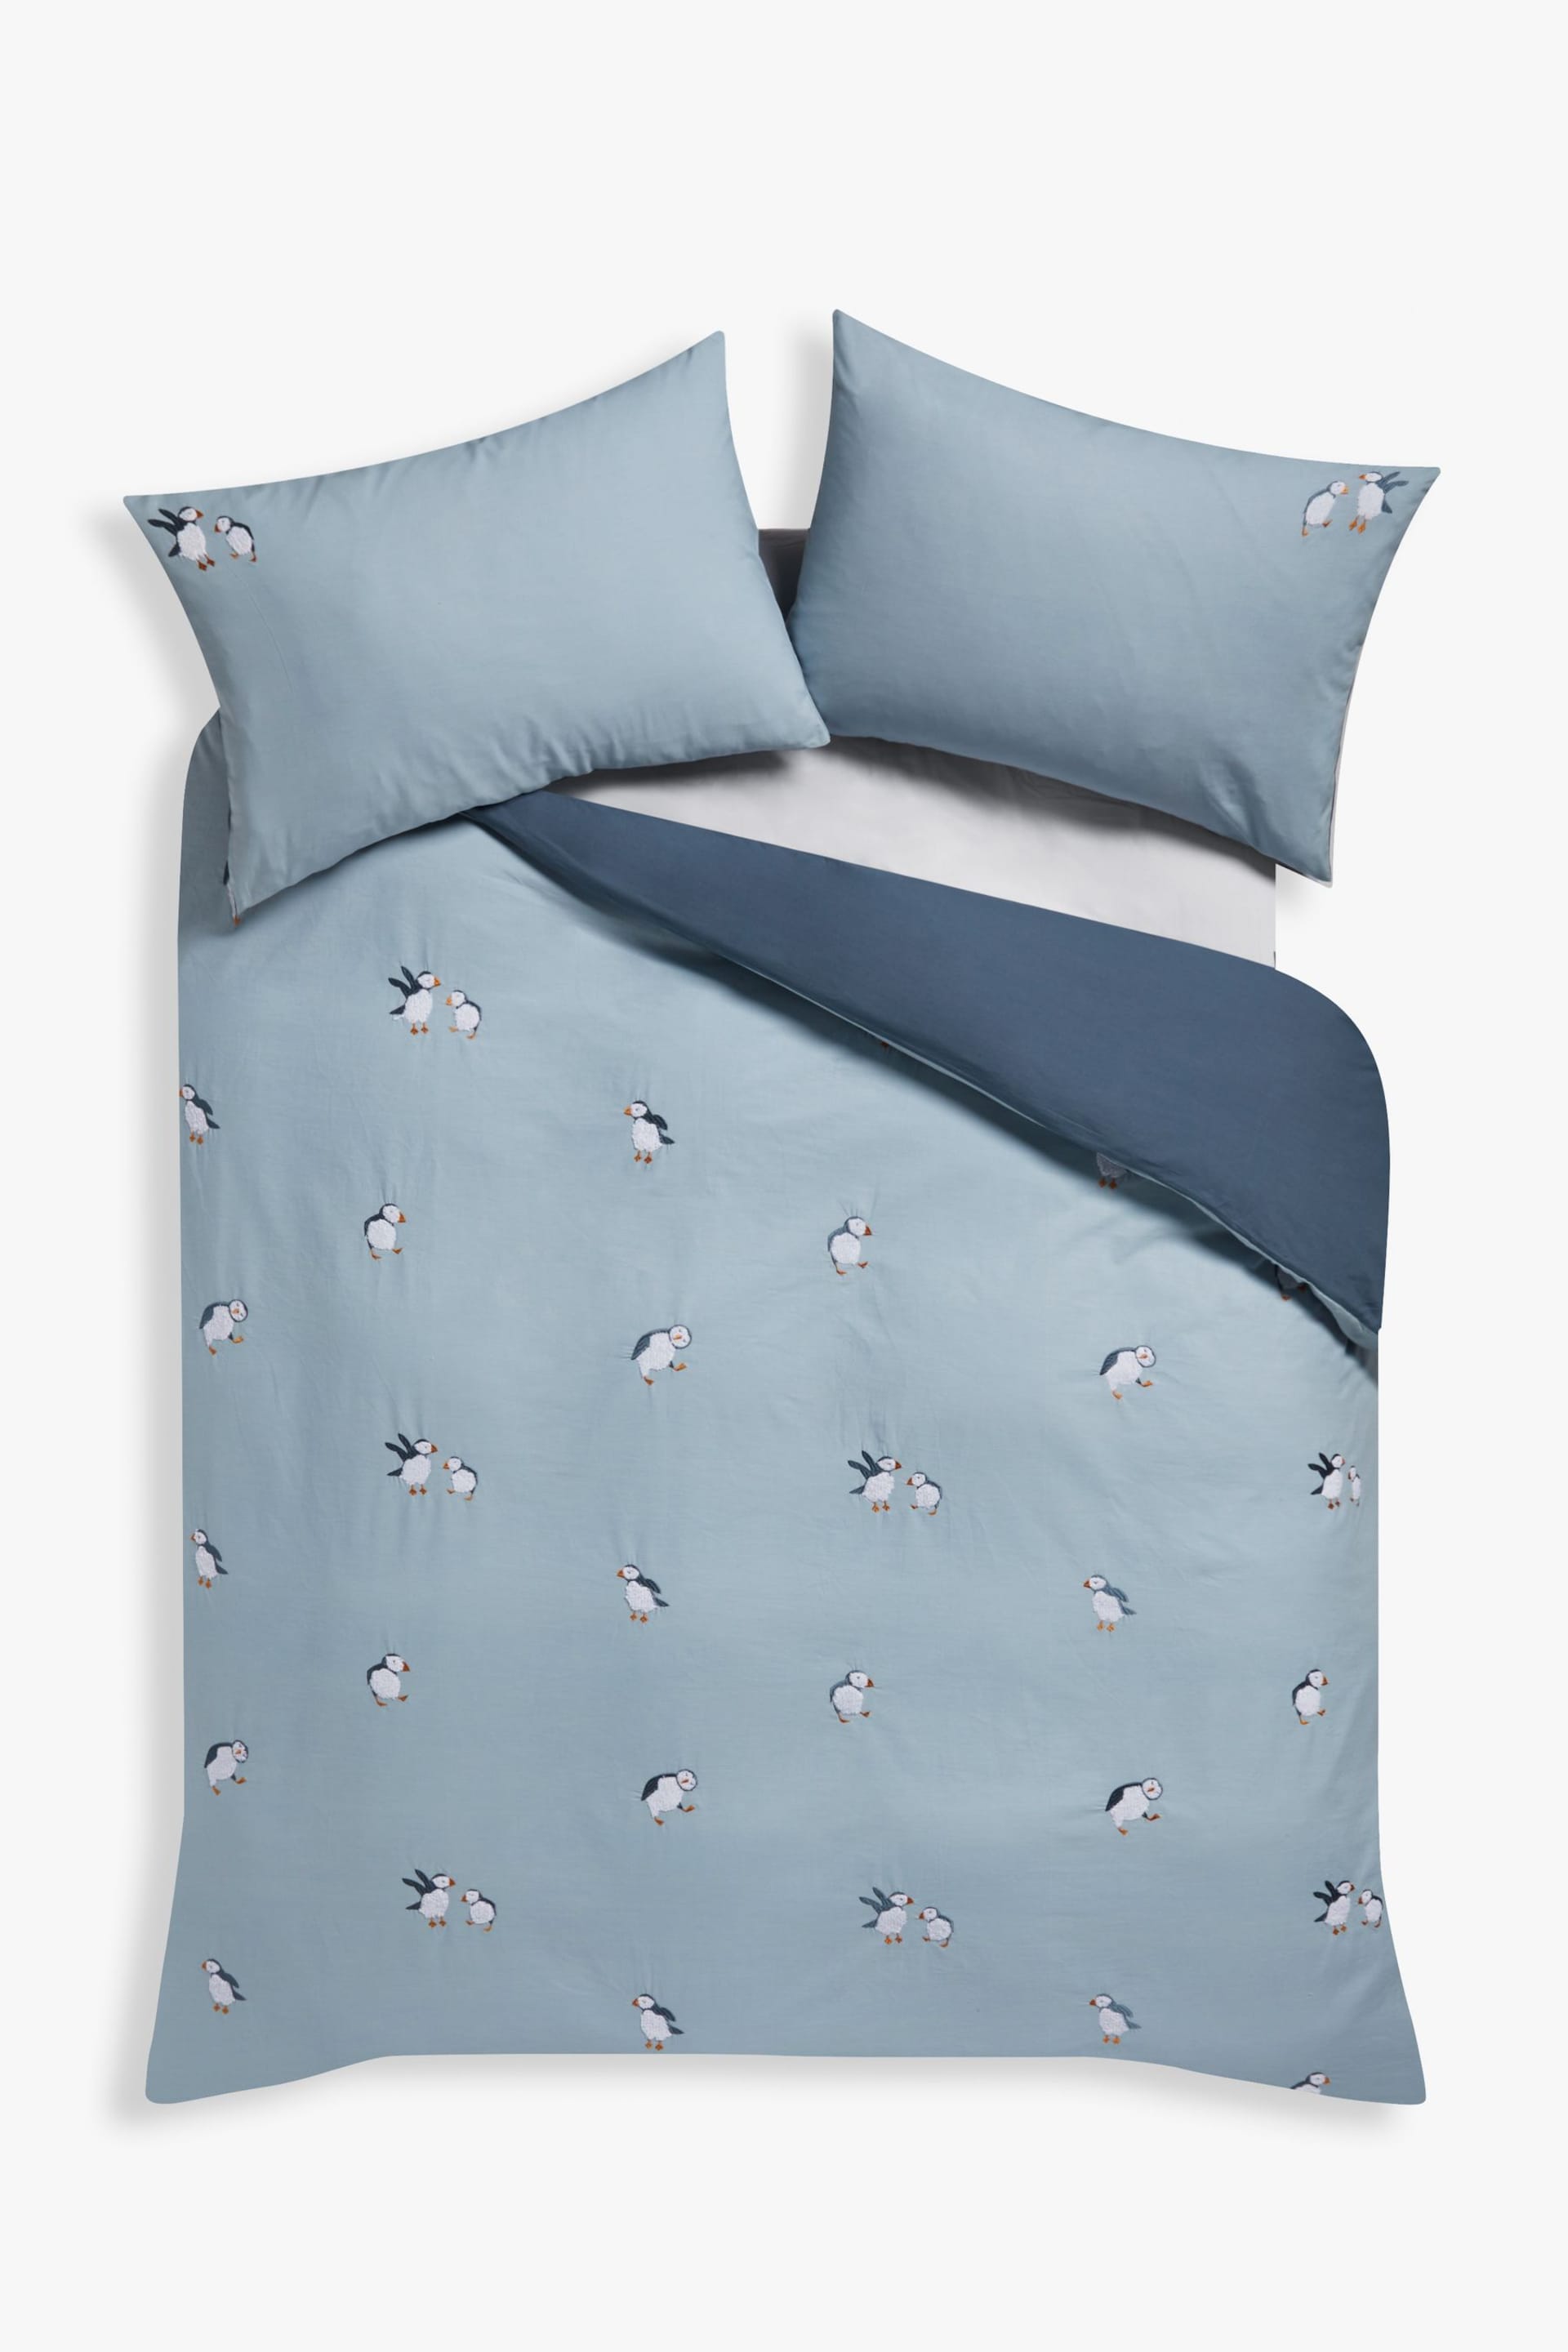 Blue Tufted Puffin Duvet Cover and Pillowcase Set - Image 3 of 5